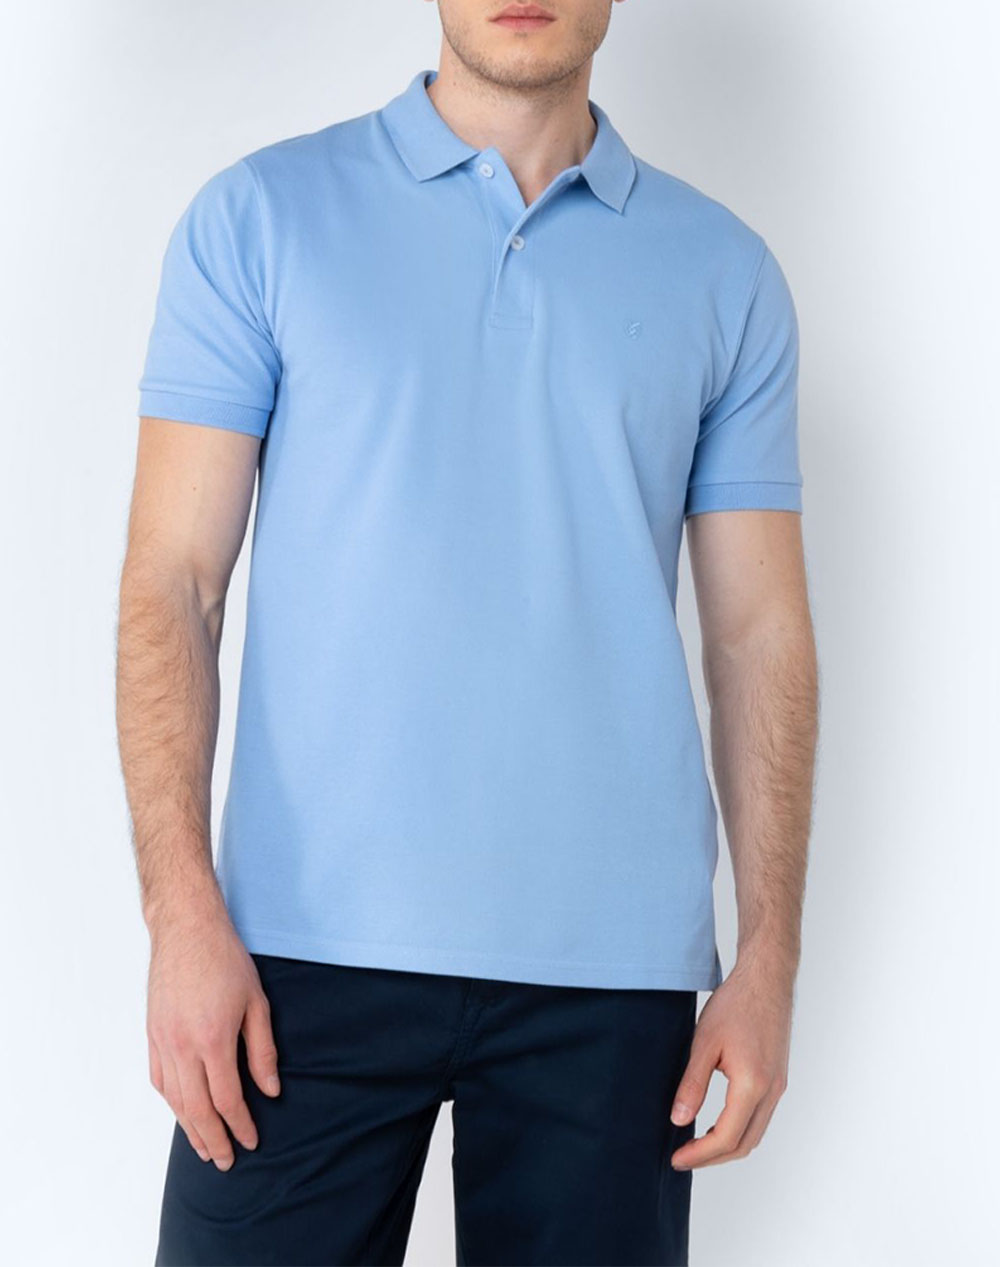 THE BOSTONIANS ΜΠΛΟΥΖΑ POLO PIQUE REGULAR FIT 3PS0001-SKY SteelBlue 3820ABOST3410092_631